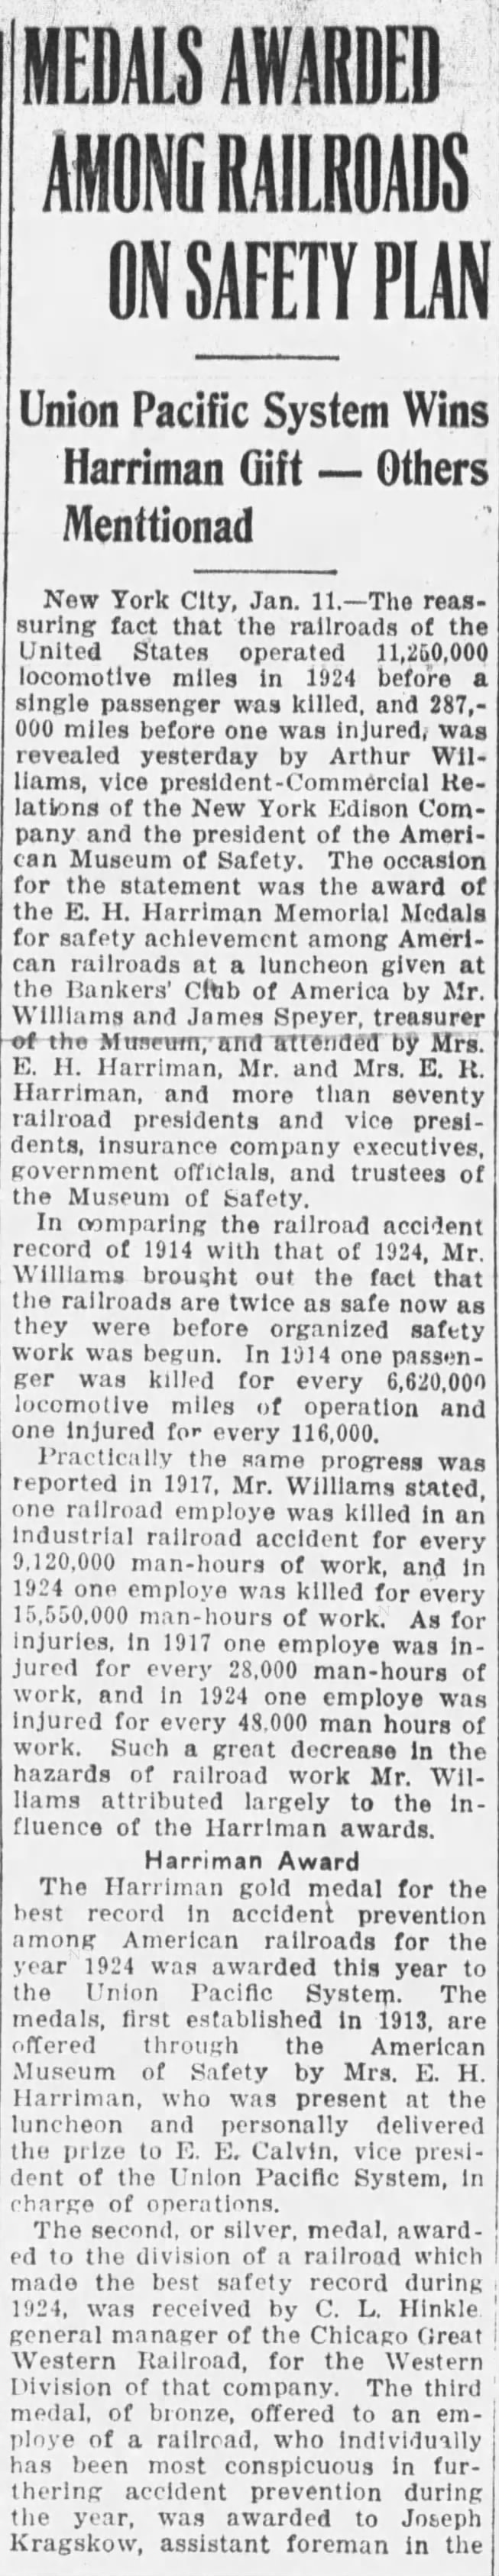 E.H. Harriman Award for railroad safety for 1924 Part 1